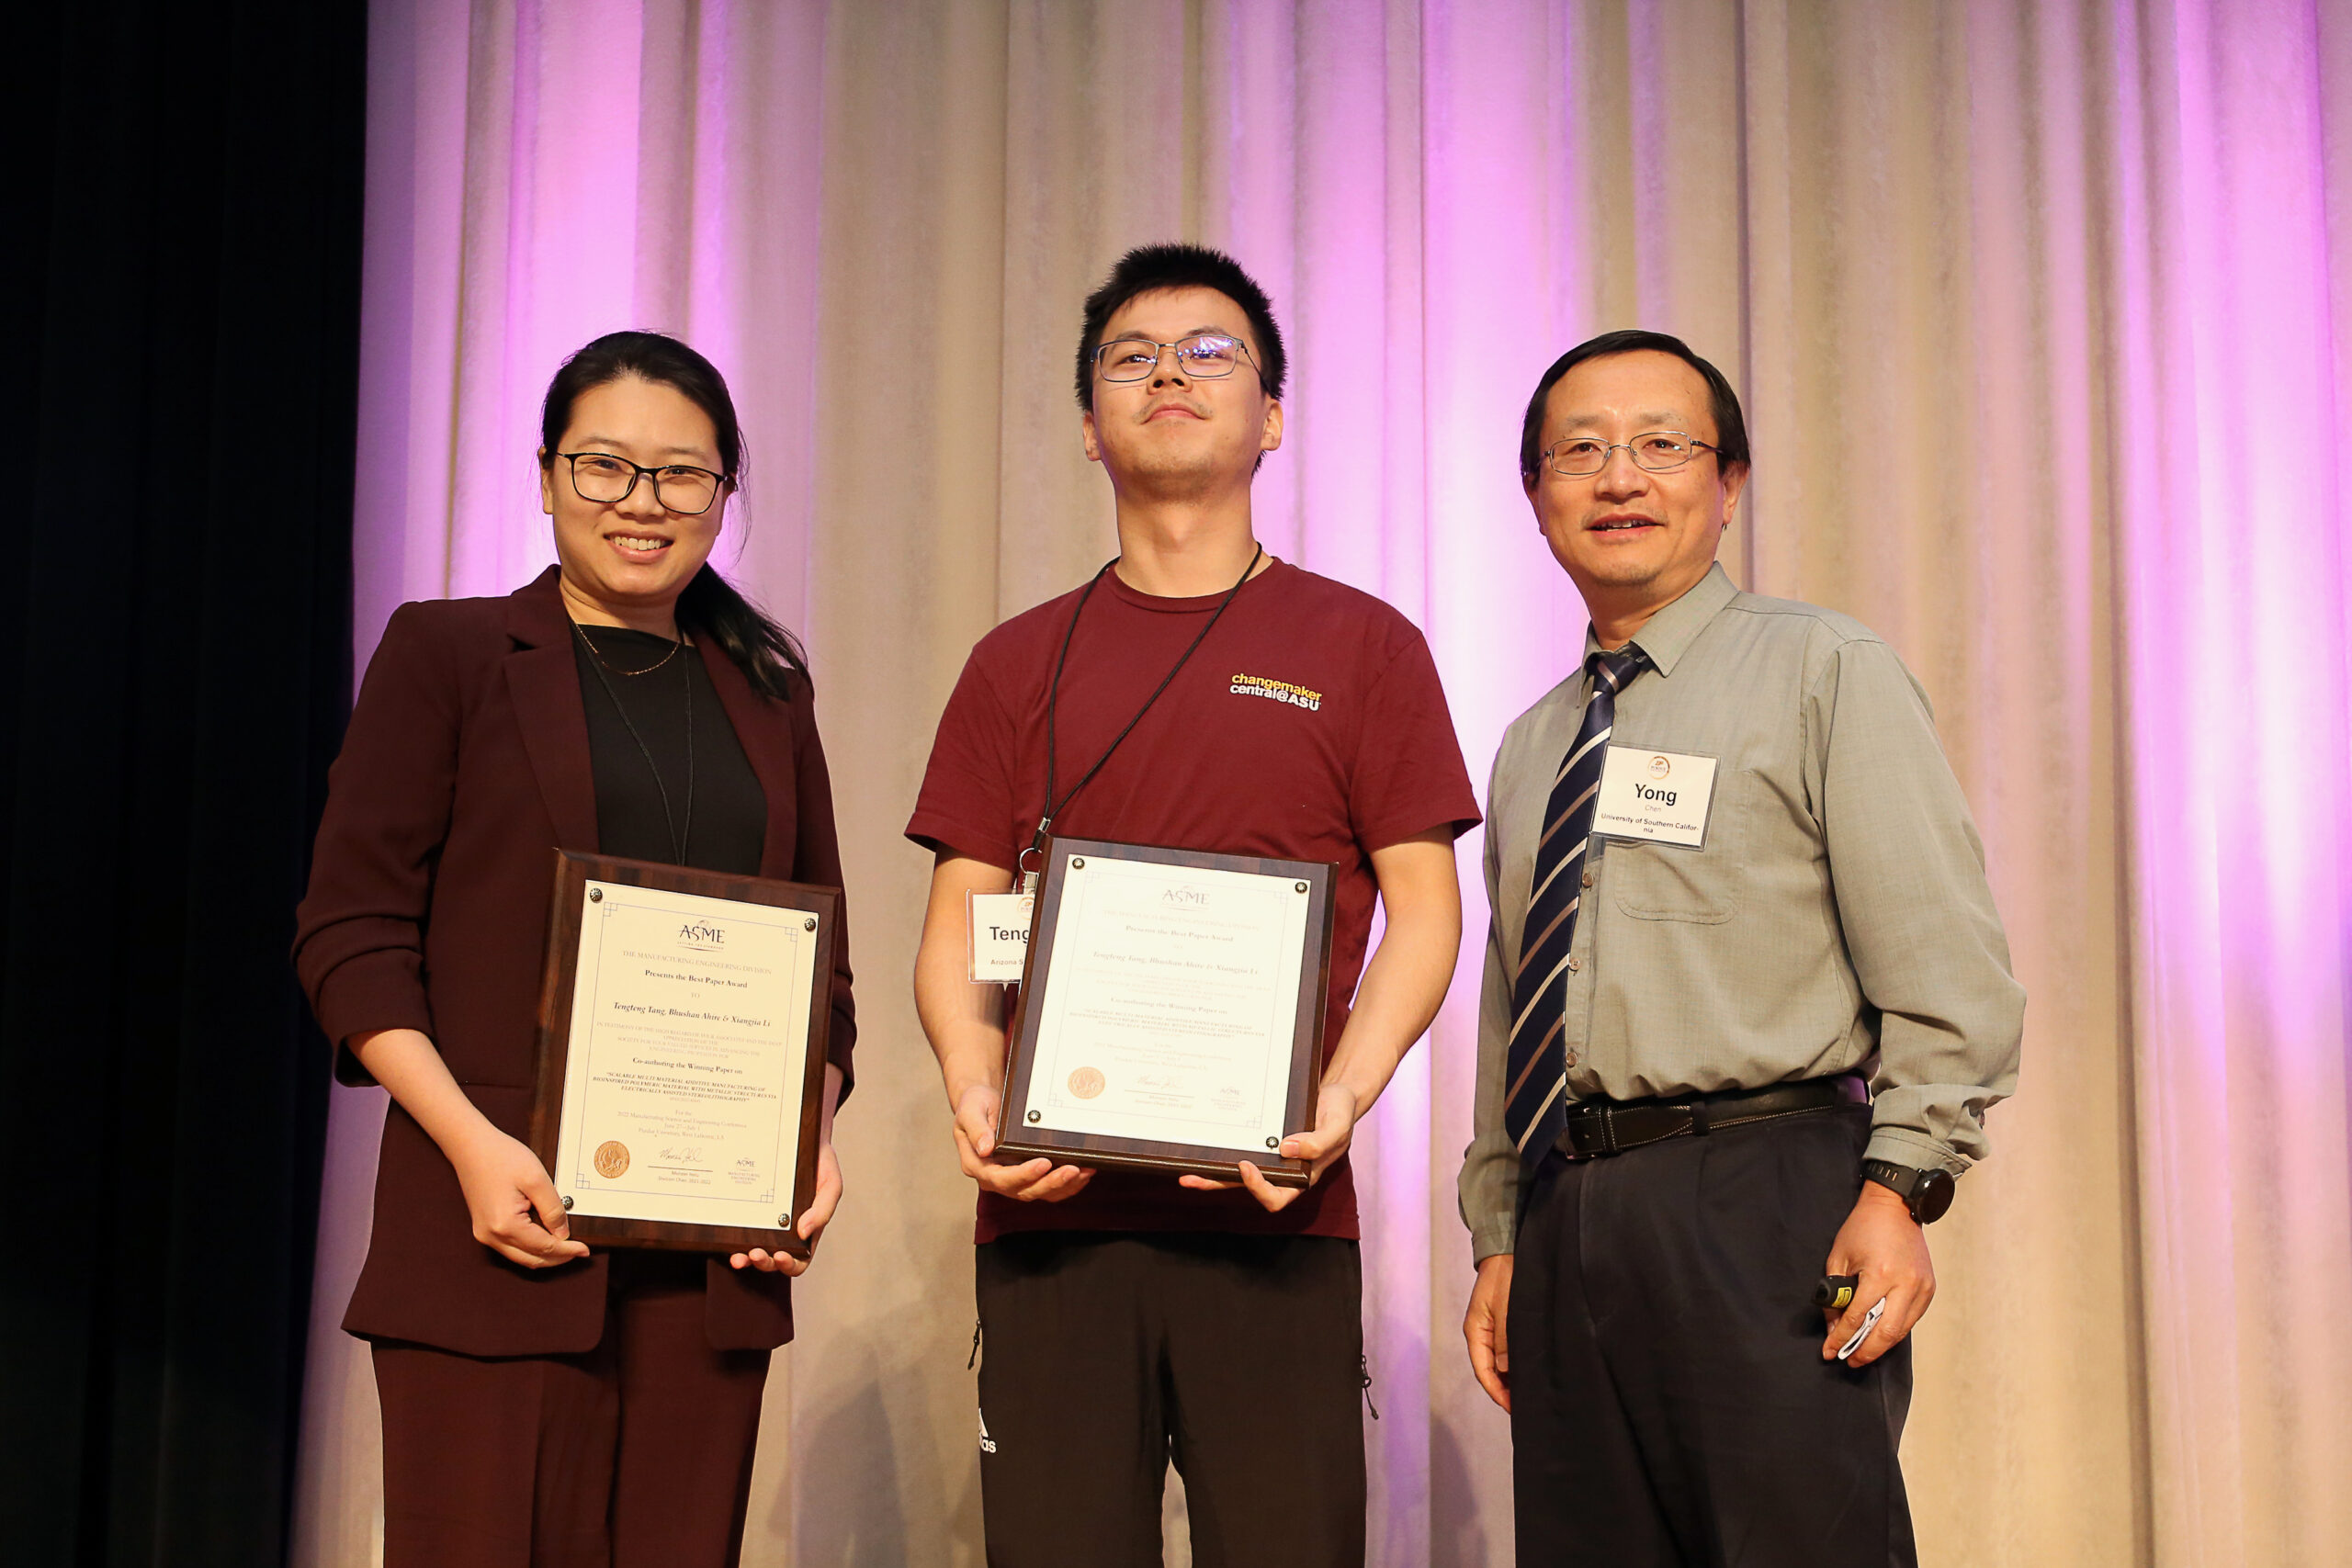 Li (first from left), receives the best paper award for developing EF-HMP. Photo courtesy of Xiangjia “Cindy” Li